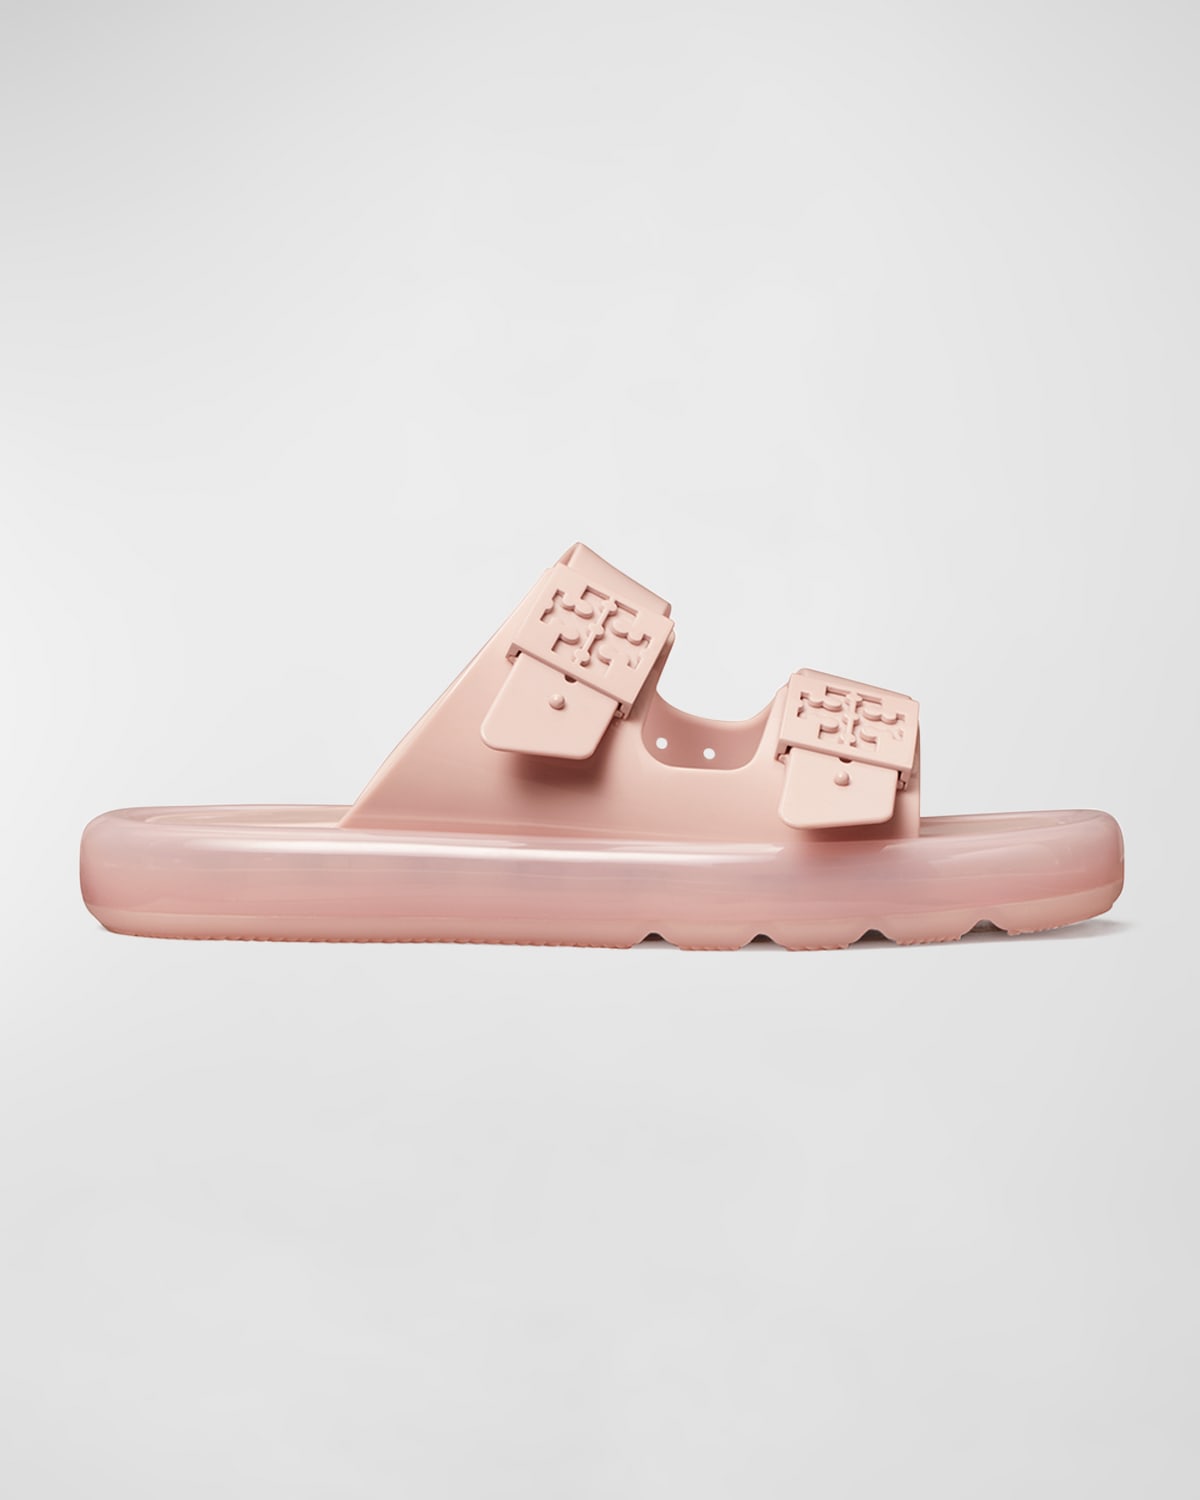 TORY BURCH TWO-TONE BUBBLE JELLY SANDALS